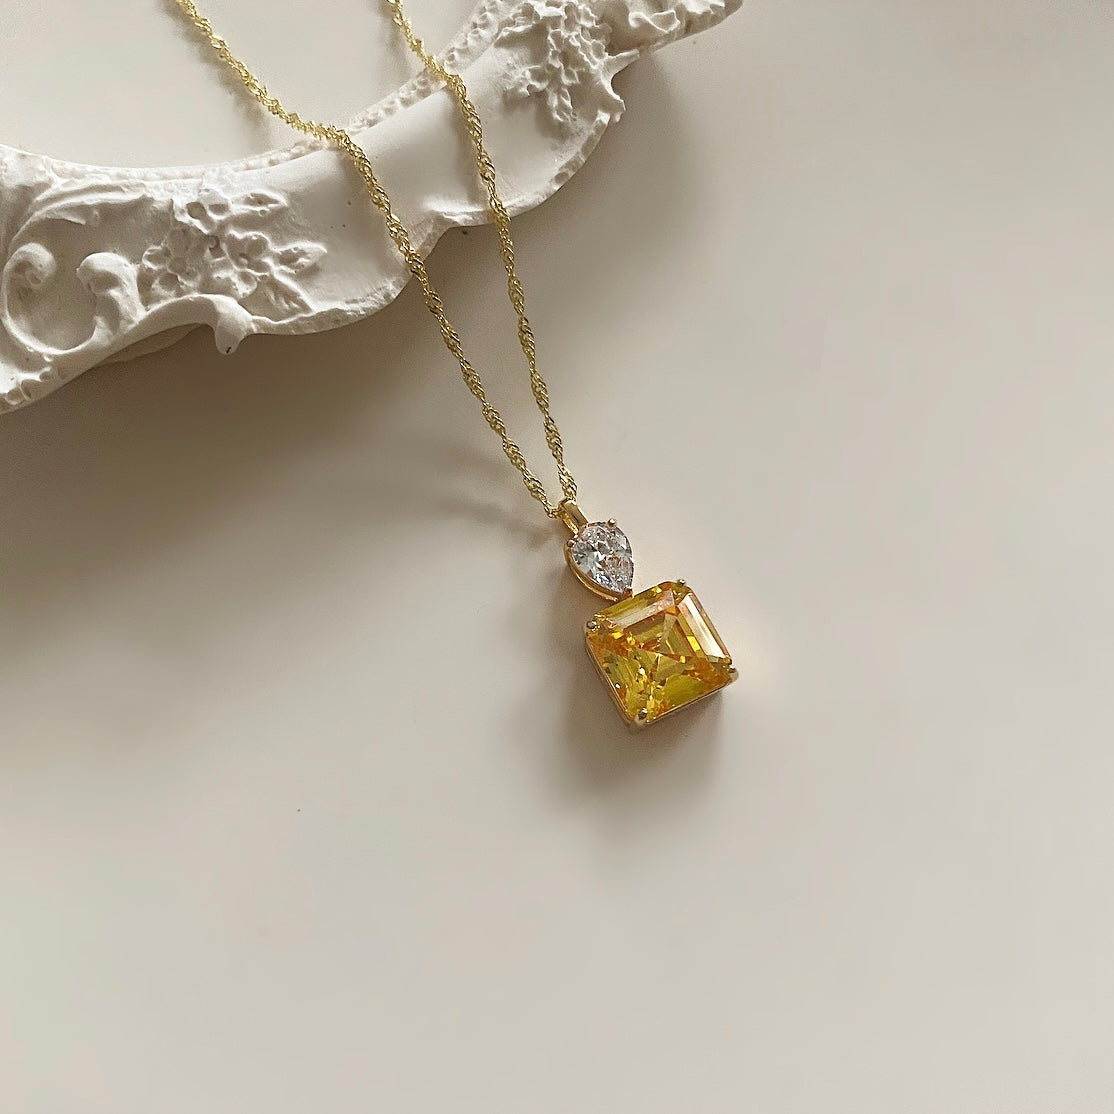 Indulge in luxury with the Saali Crystal Necklace. Made of gold plated sterling silver, this elegant necklace is embellished with shimmering cubic zirconia stones. Elevate any outfit with this stunning accessory and dazzle with every step.